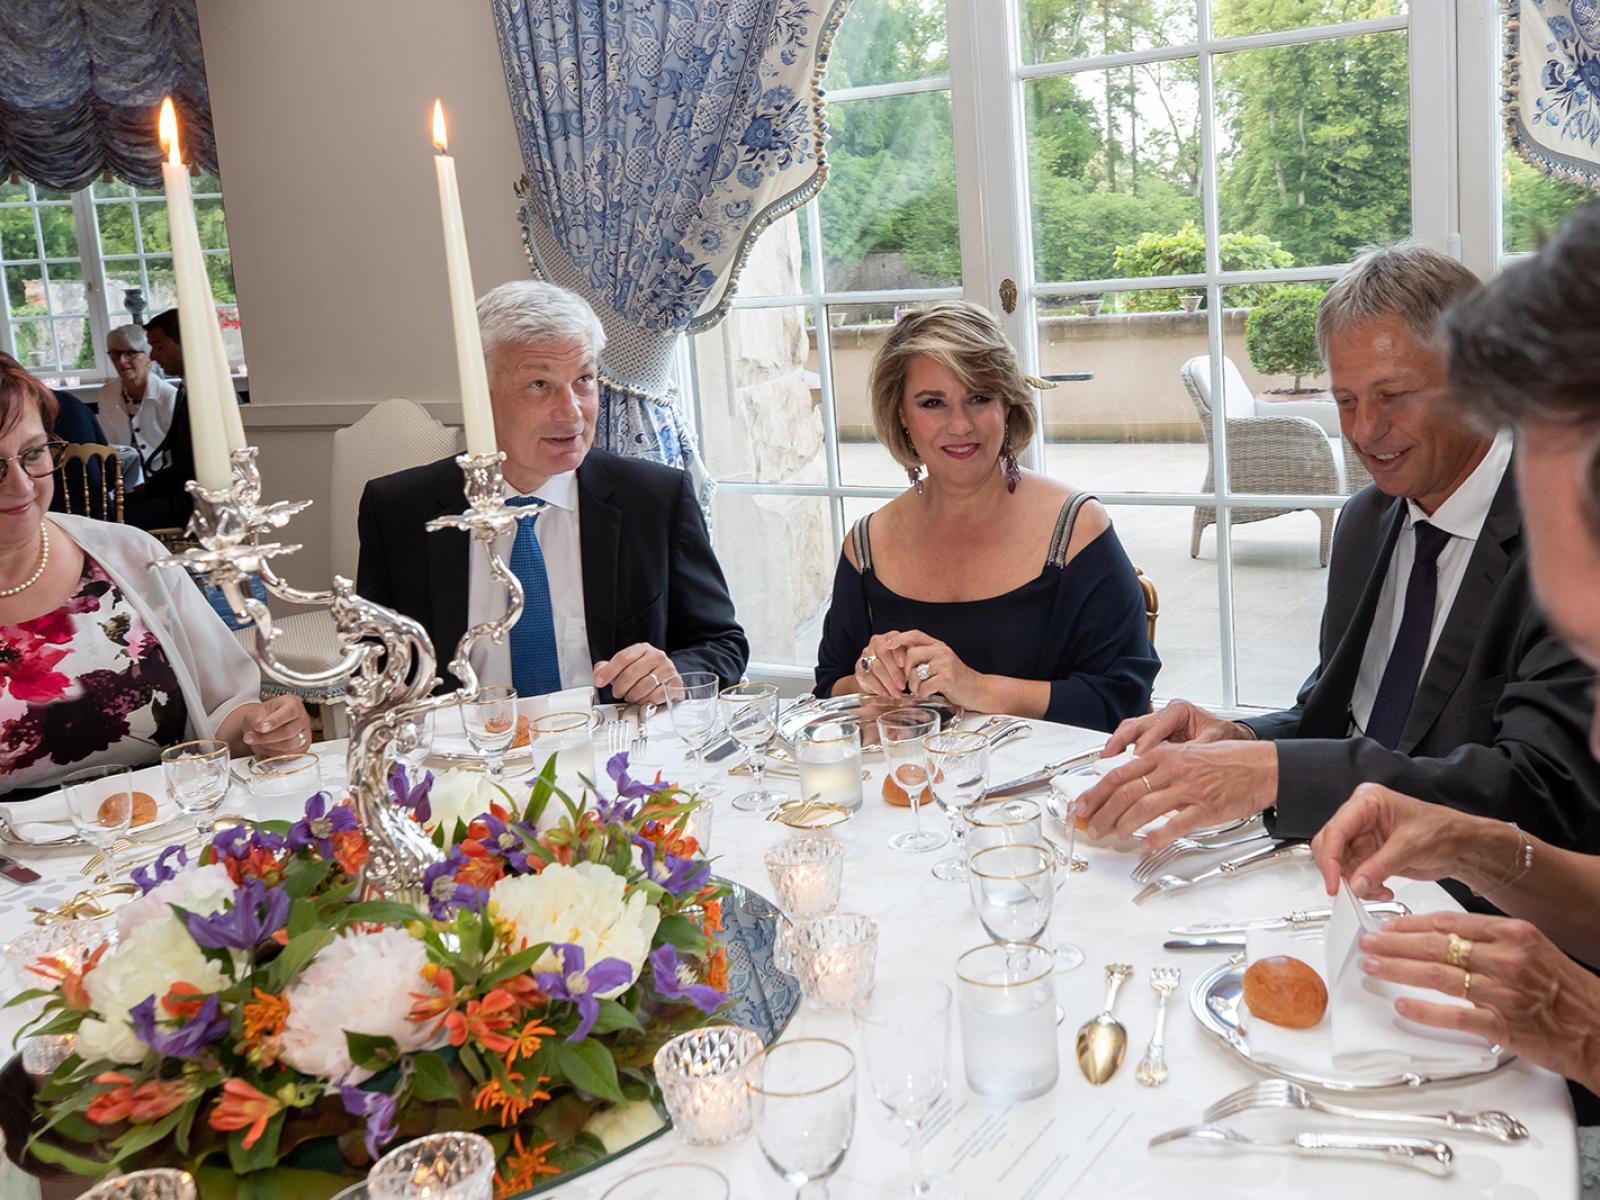 The Grand Duchess during the Institutional dinner